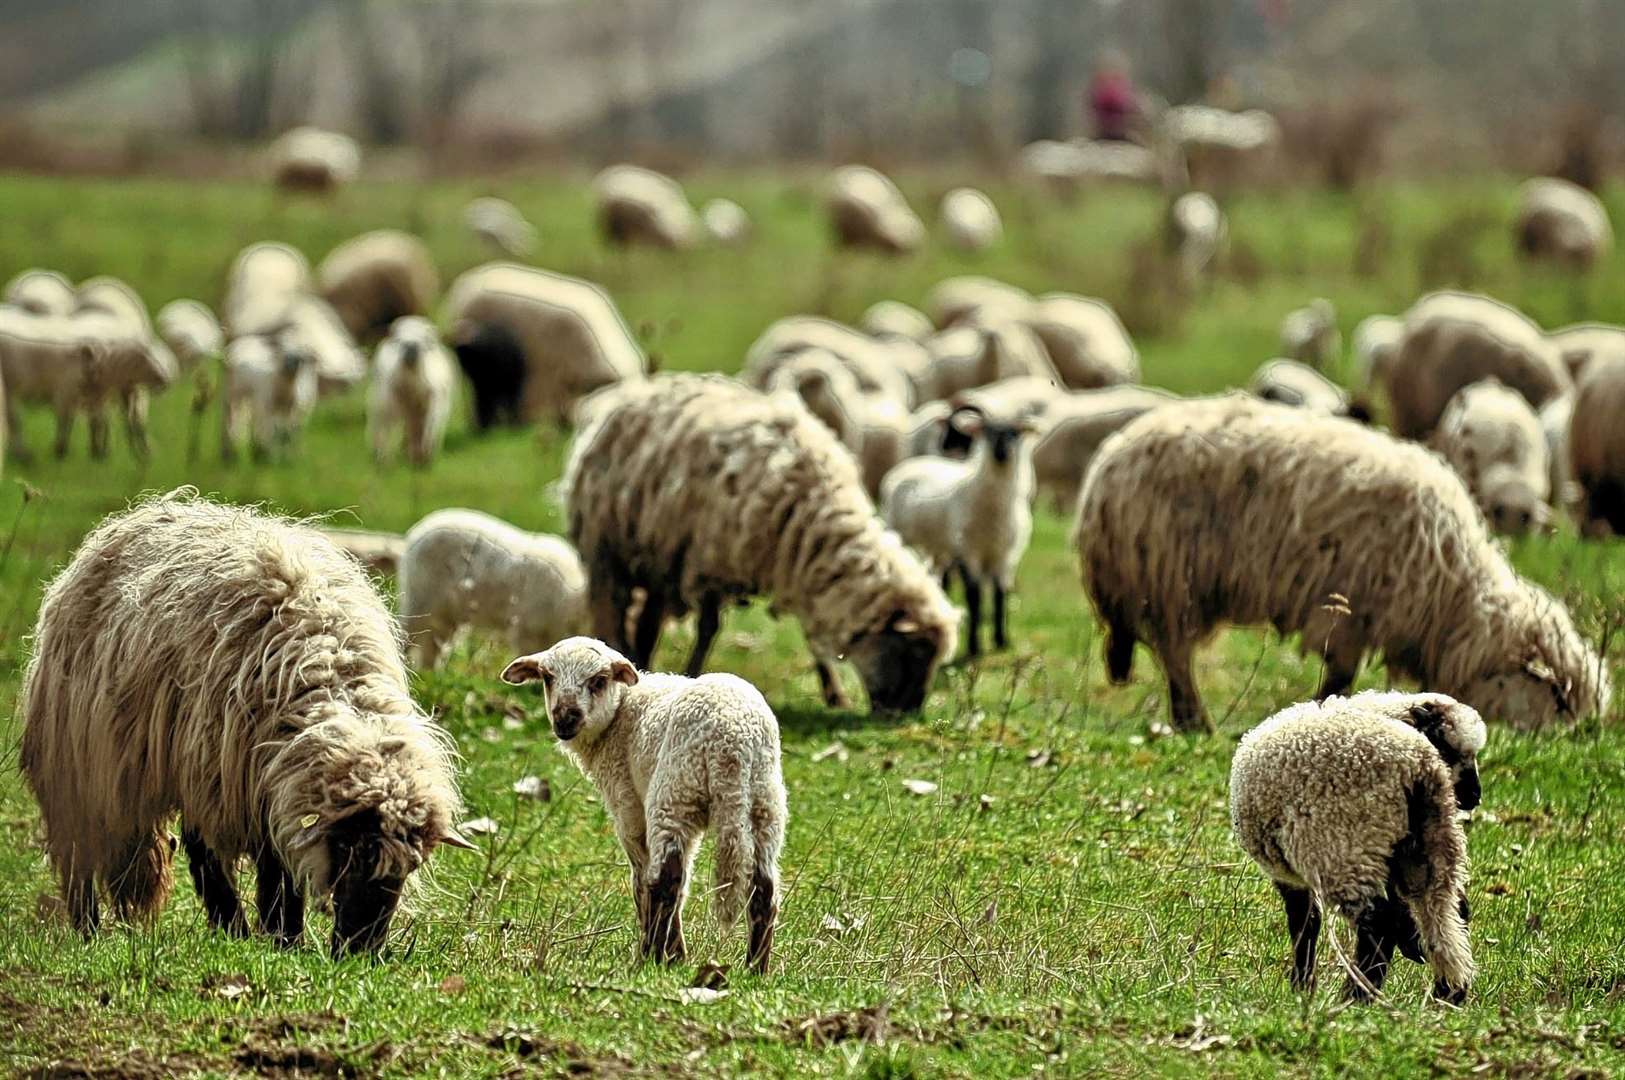 With lambs now in fields dog owners have been urged to keep their pets under control.